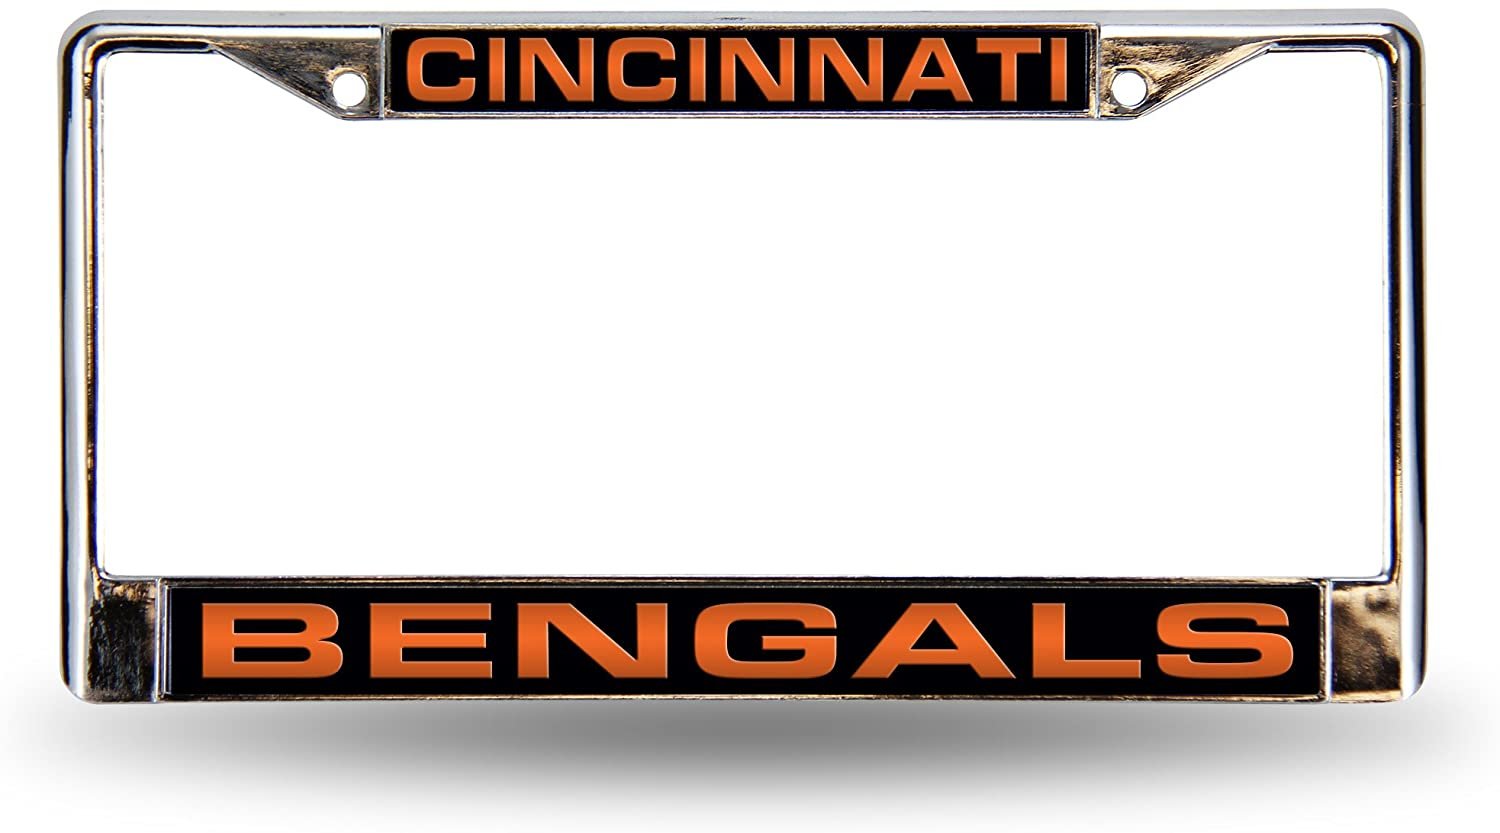 Cincinnati Bengals Chrome Metal License Plate Frame Tag Cover, Laser Acrylic Mirrored Inserts, 12x6 Inch